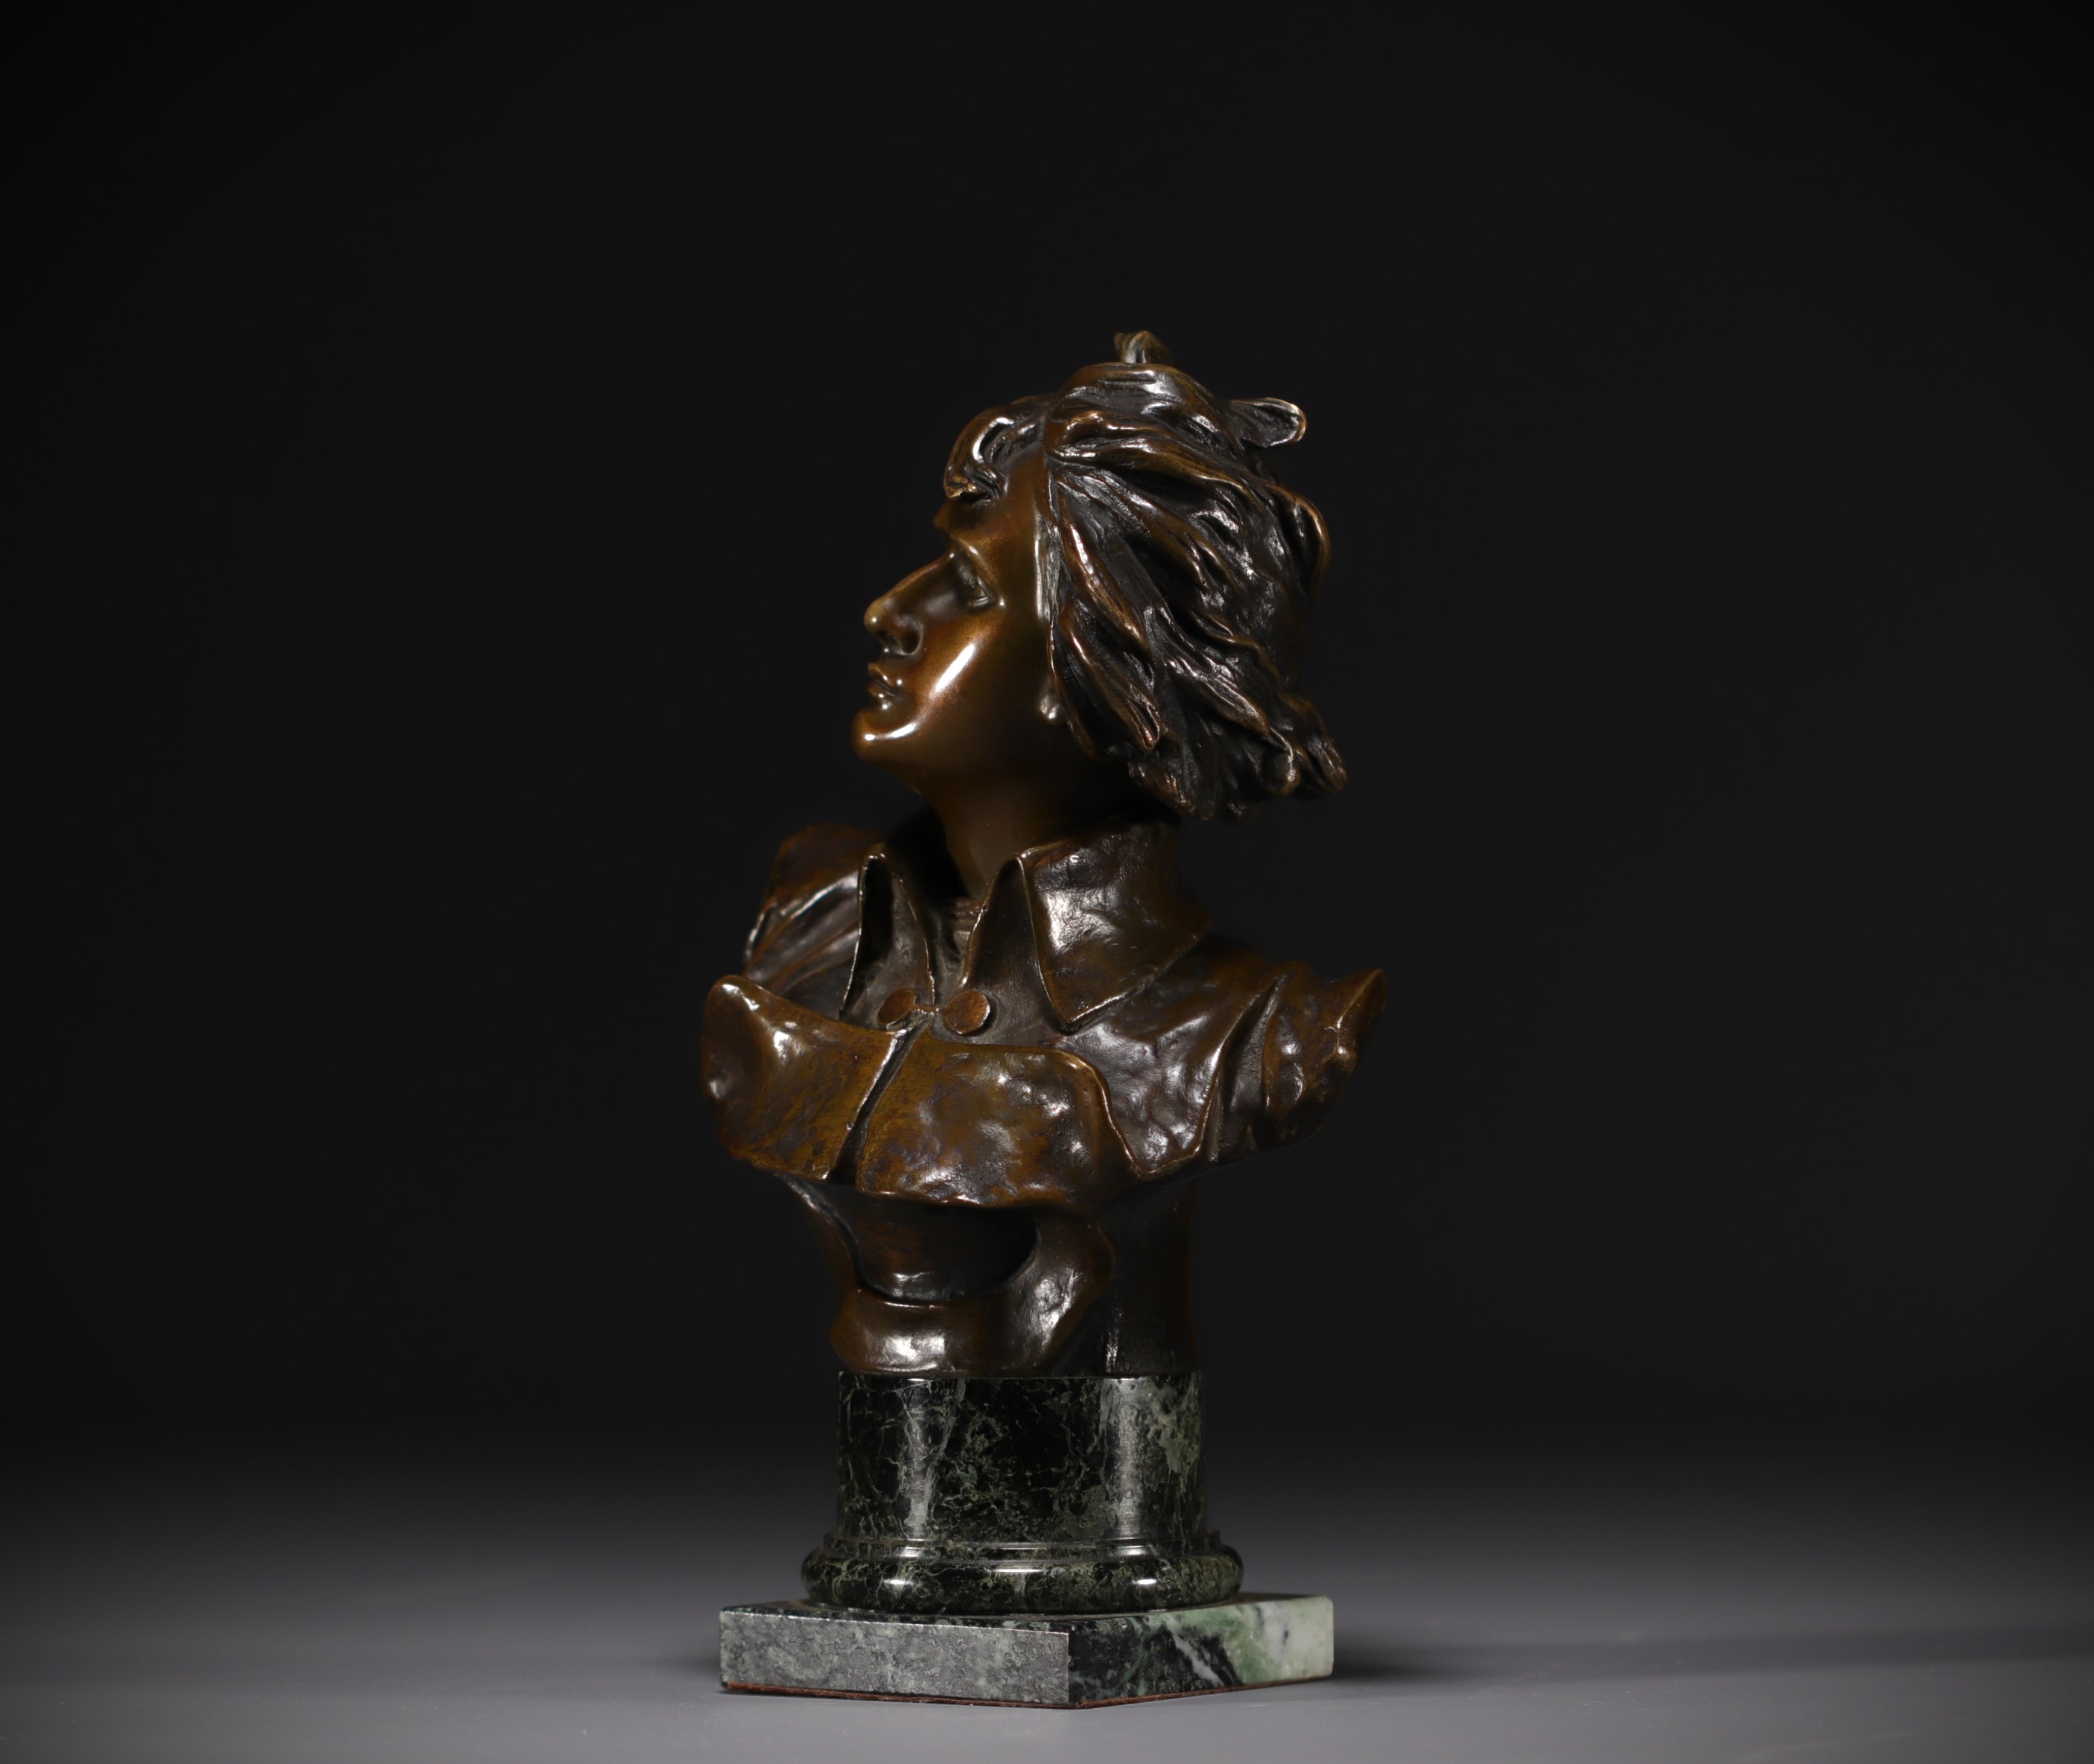 Lucas MADRASSI (1848-1919) "Young Napoleon Bonaparte" Bust in bronze with brown patina. - Image 2 of 6